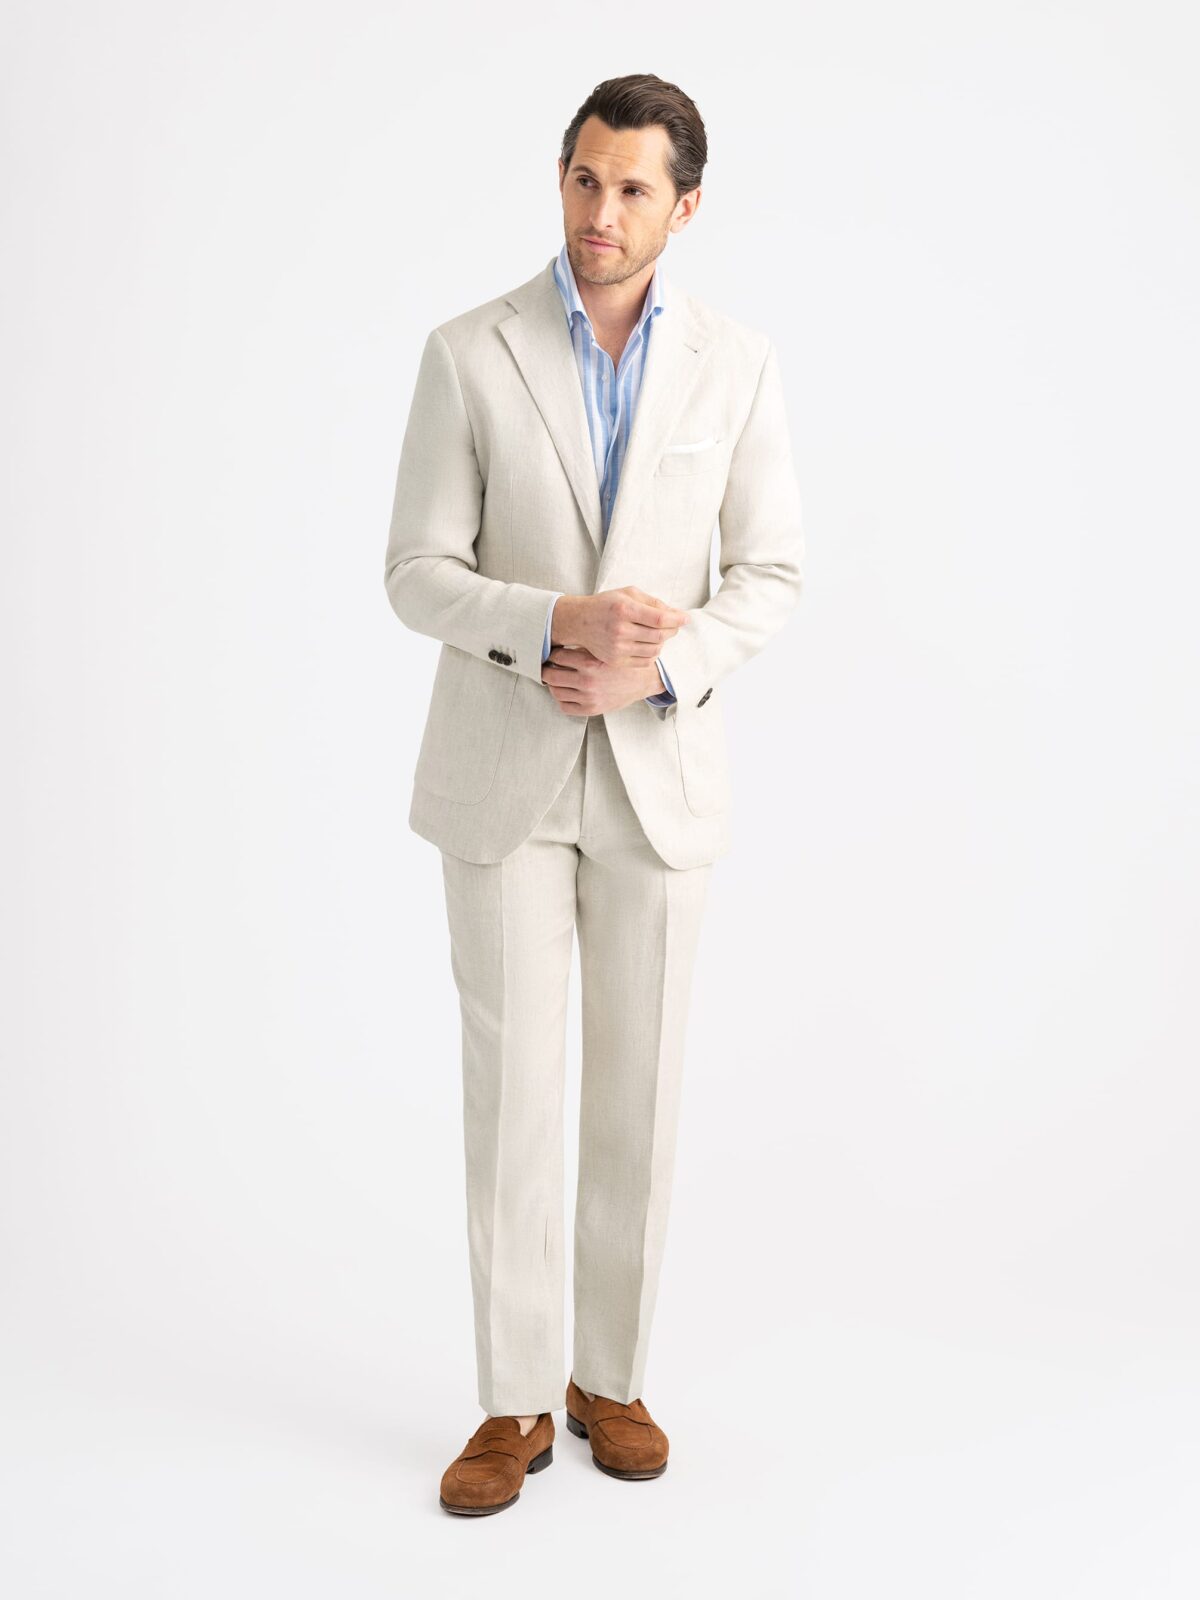 Natural Irish Linen Bedford Suit - Custom Fit Tailored Clothing